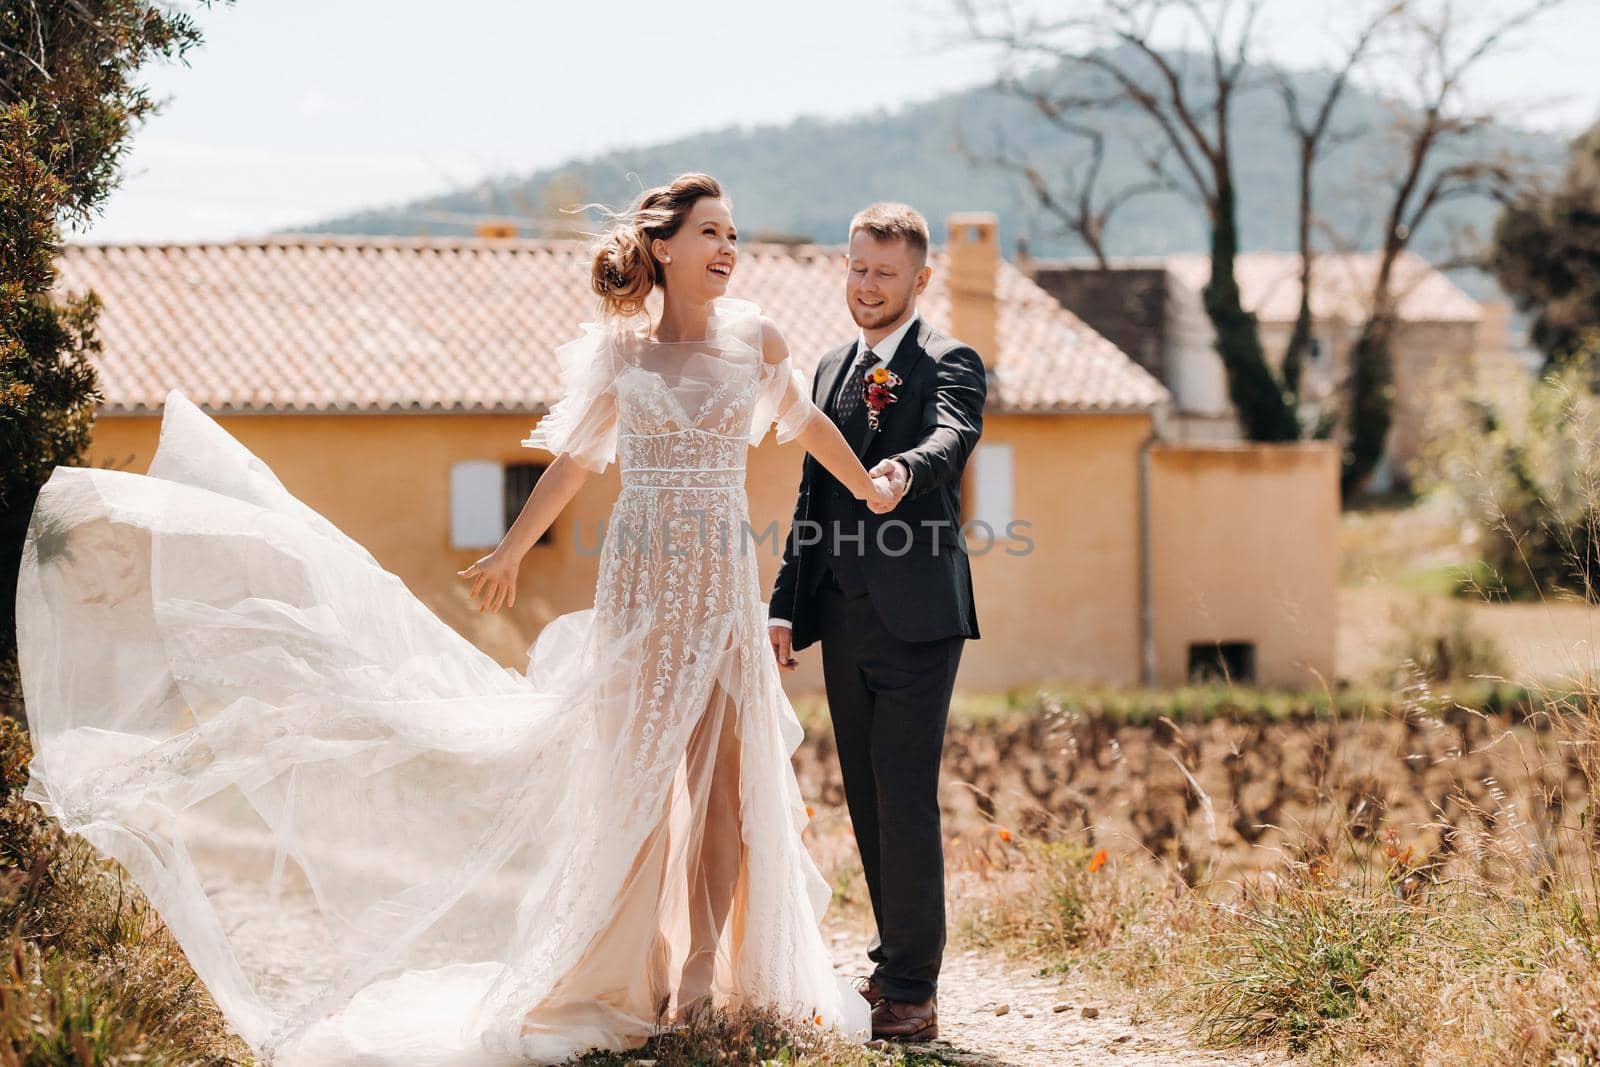 Wedding couple near a Villa in France.Wedding in Provence.Wedding photo shoot in France by Lobachad